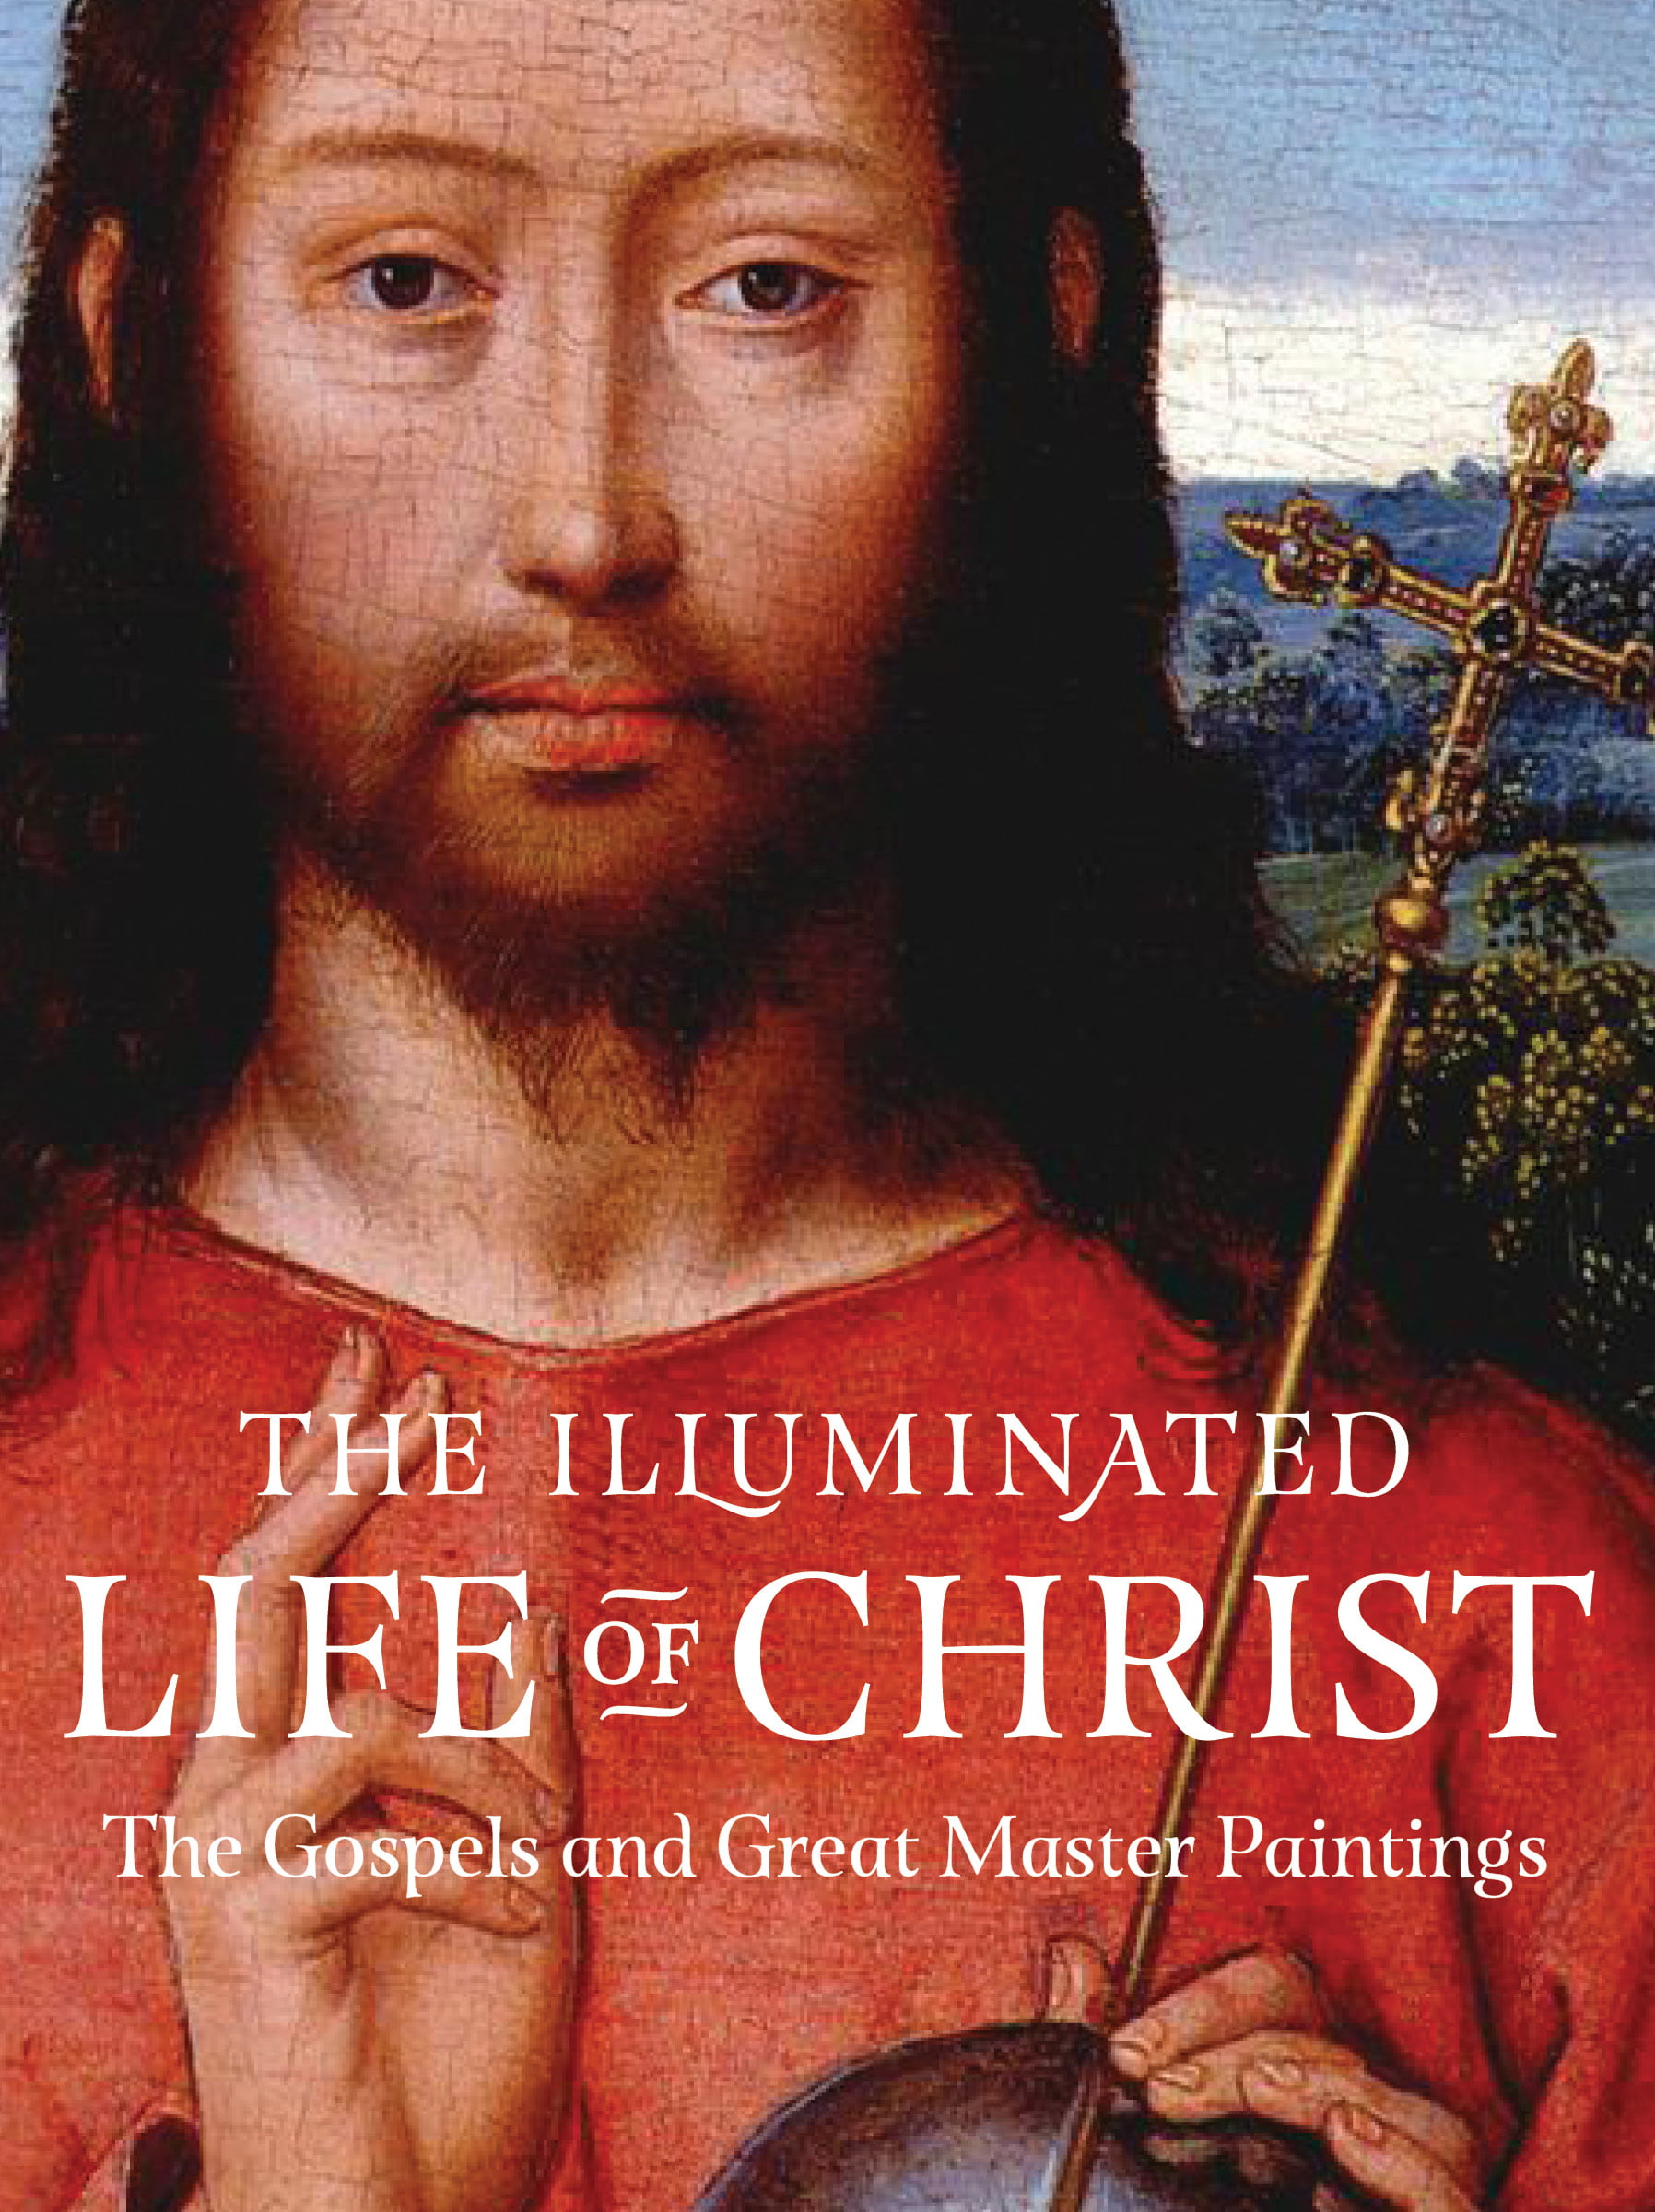 The Illuminated Life of Christ The Gospels and Great Master Paintings